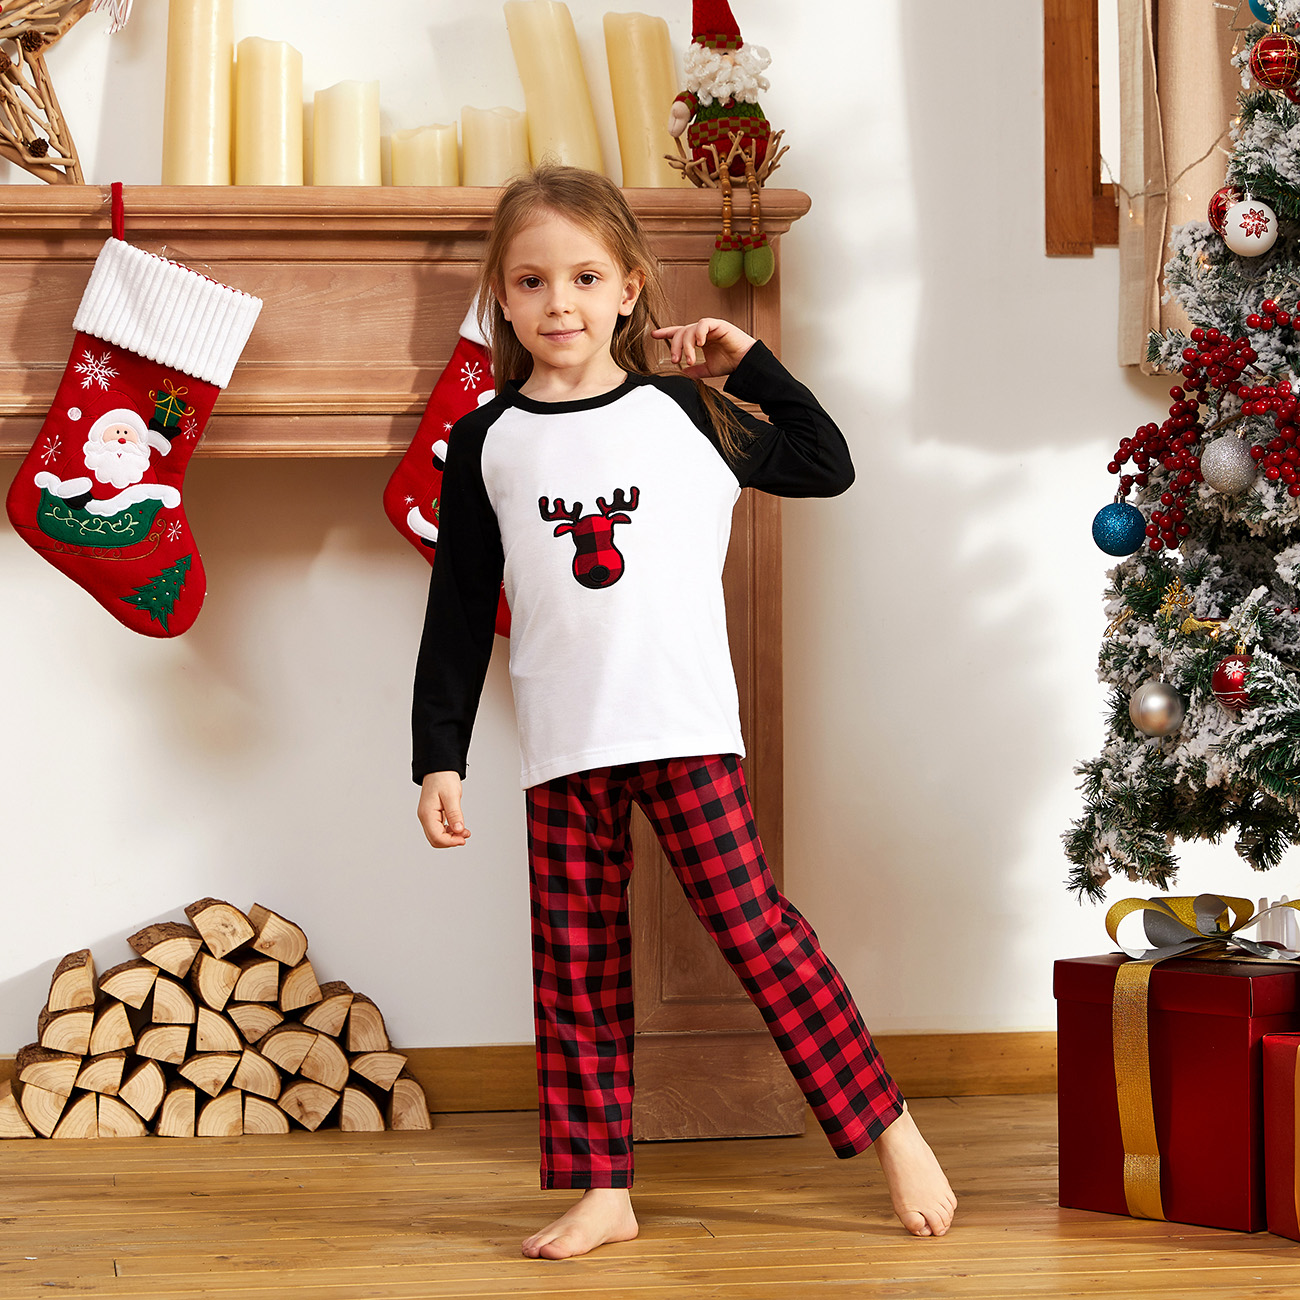 PatPat Black/White Mommy and Me Christmas Plaid Deer Family Matching Pajamas 2-piece,Unisex - image 6 of 12